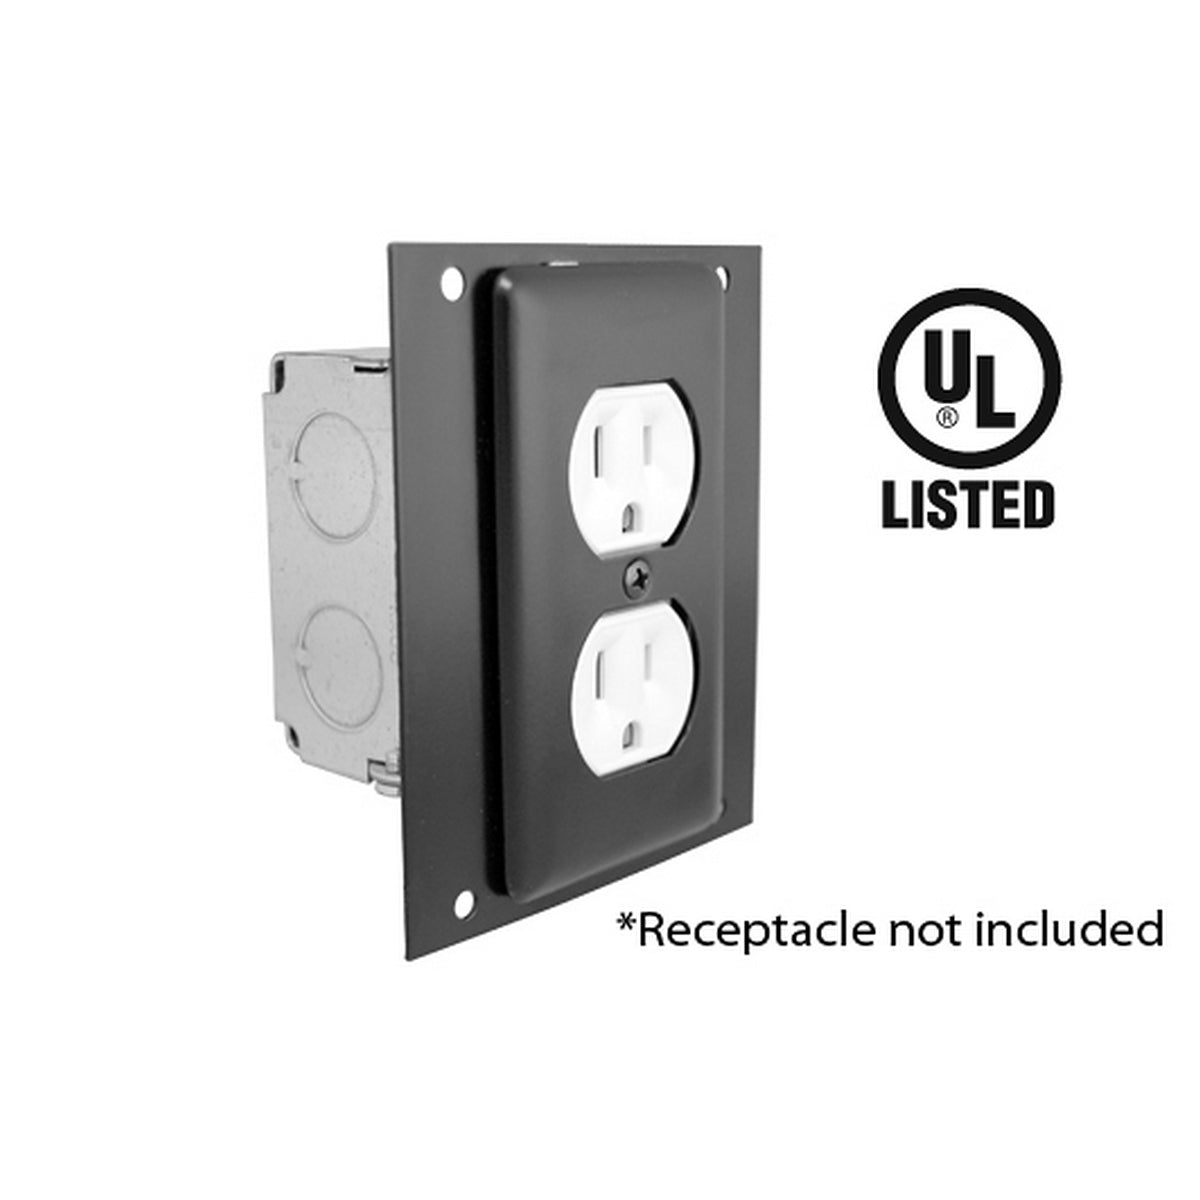 Ace Backstage Co. PE | PE Steel CONNECTRIX Electric Pocket Panel with Single Gang Edison Duplex Outlet